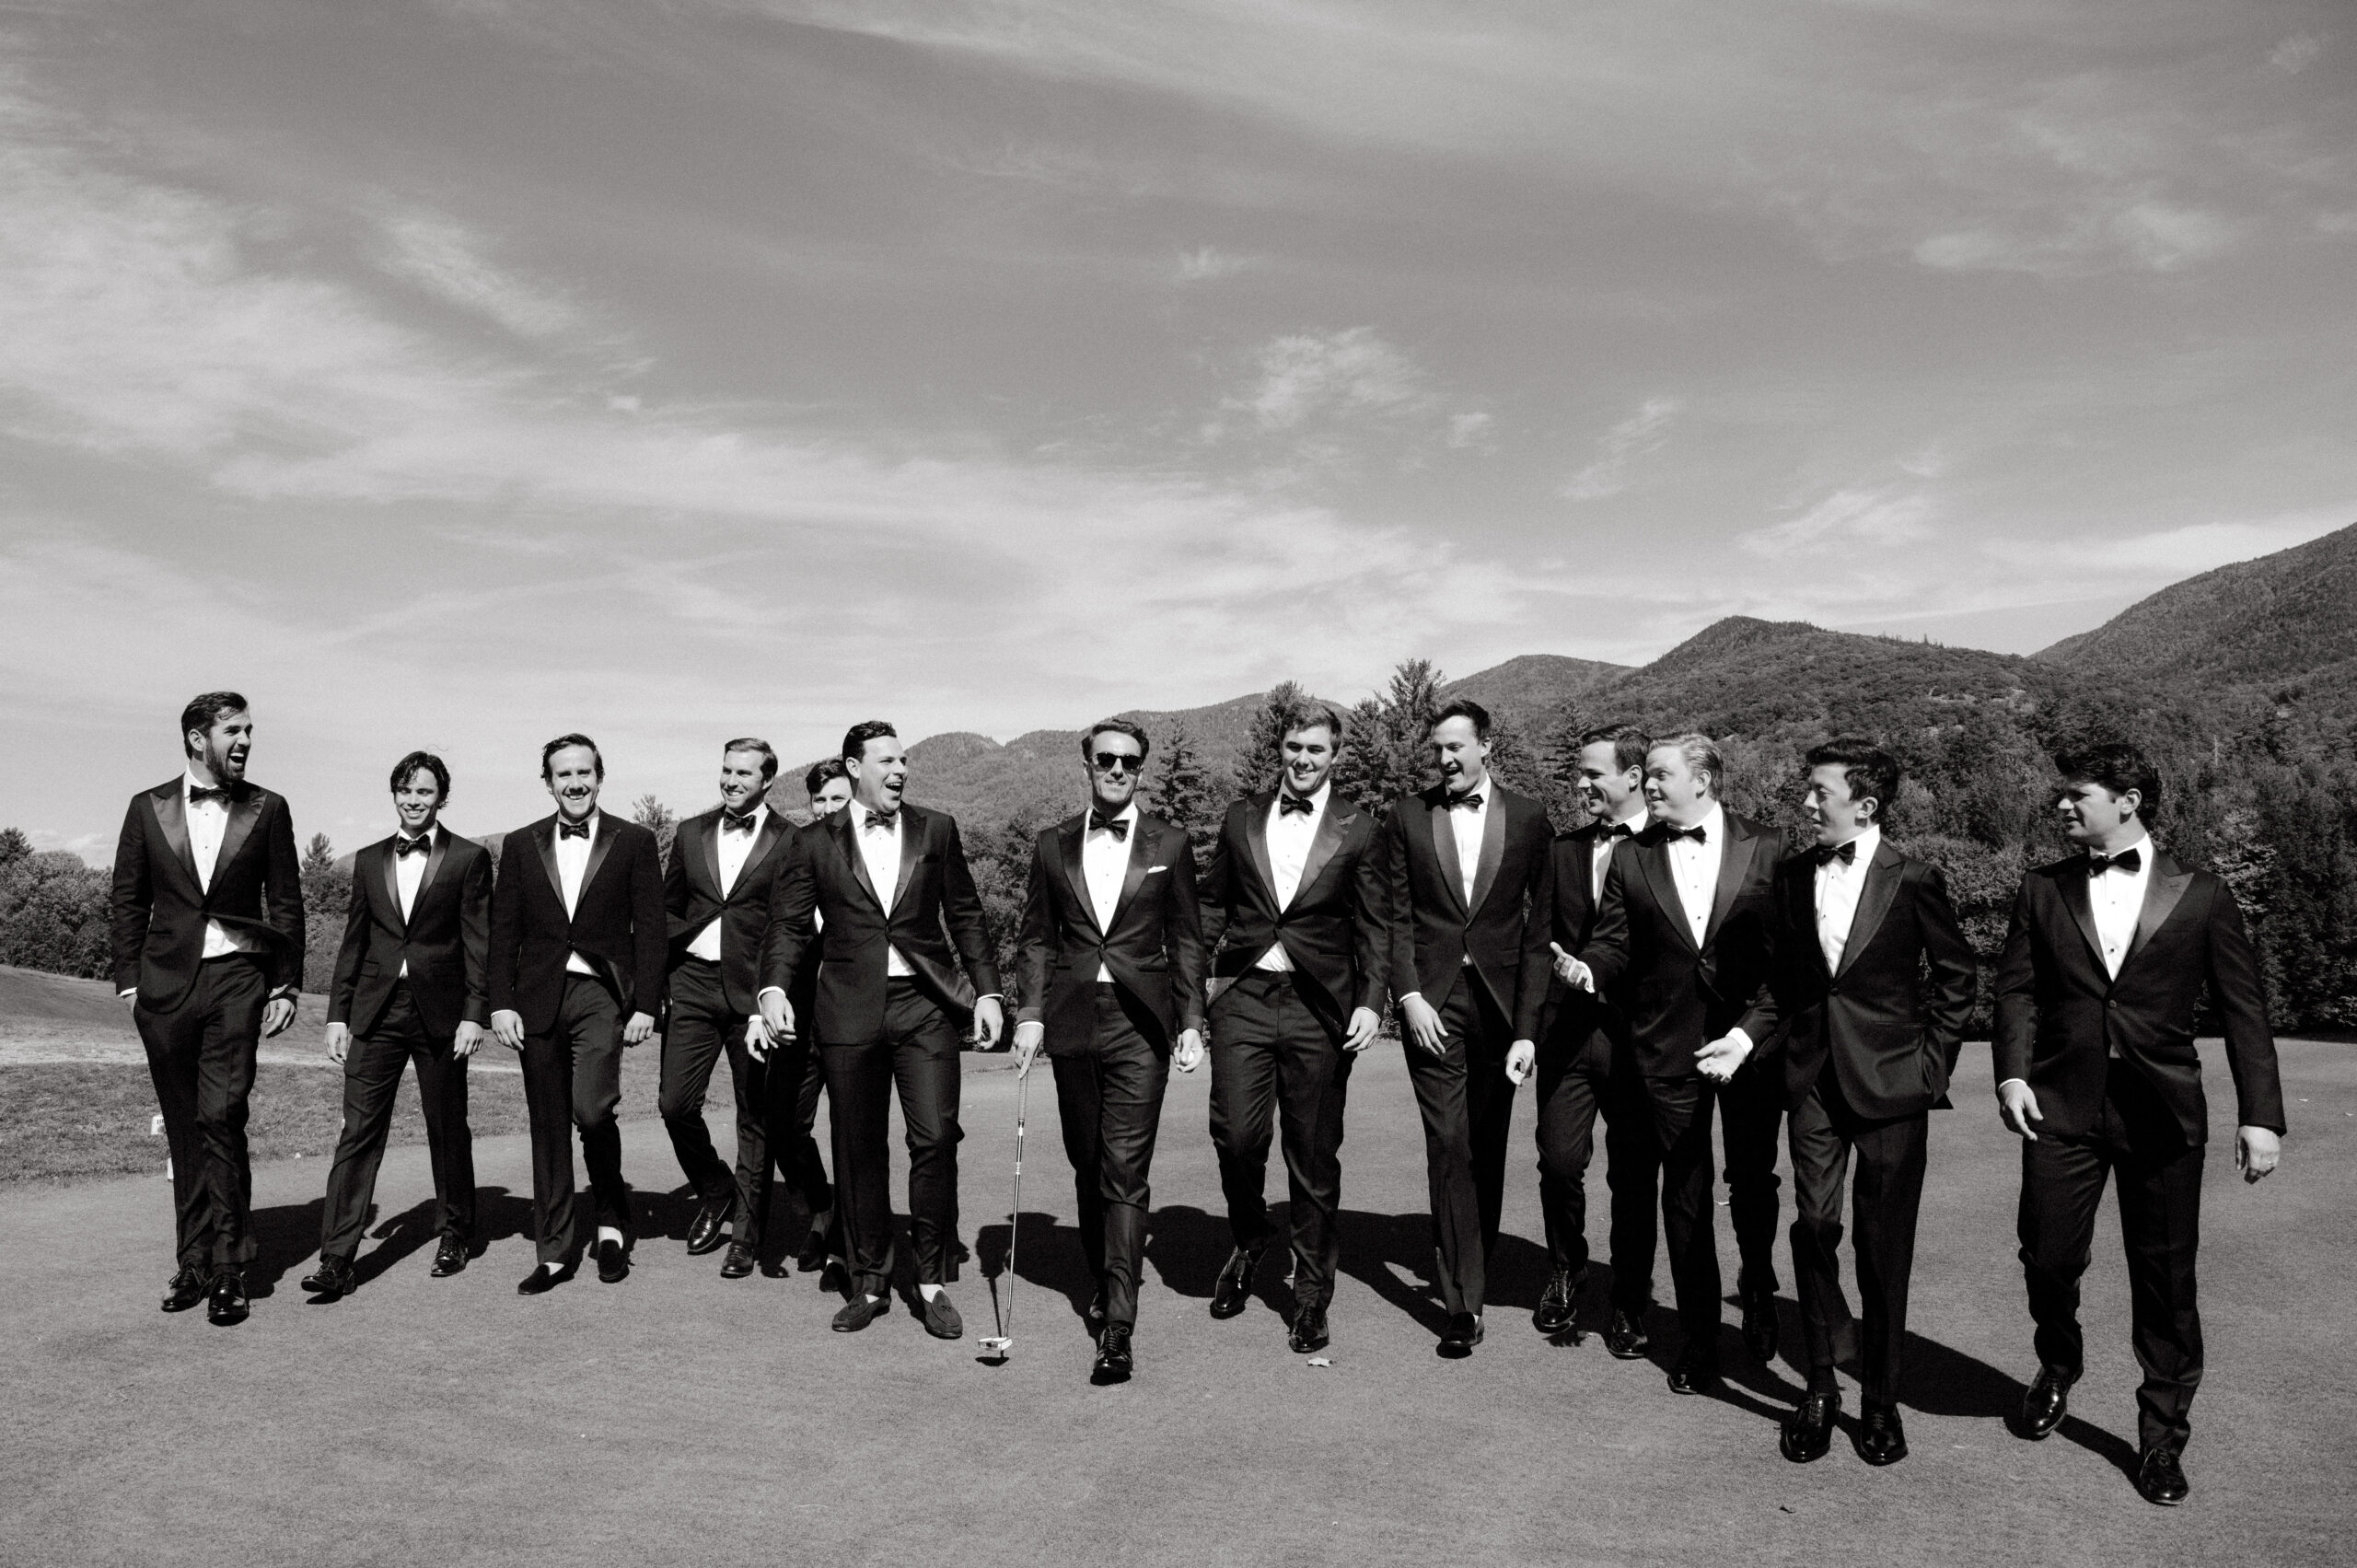 Black and white editorial image of the groom and groomsmen. Heirloom wedding album image by Jenny Fu Studio